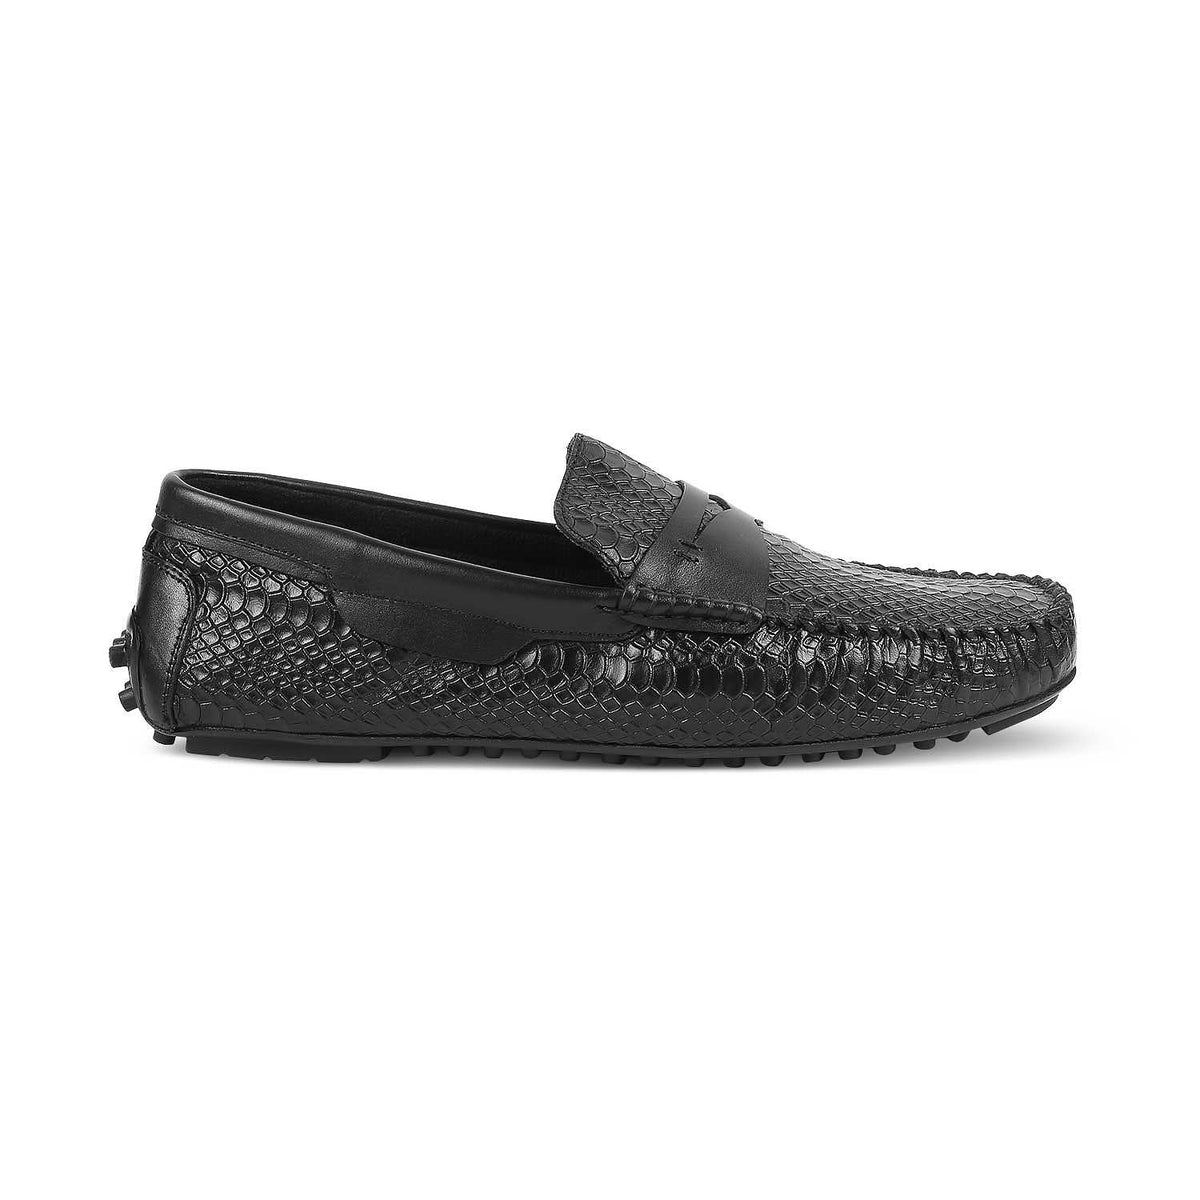 The Argon Black Men's Leather Driving Loafers Tresmode